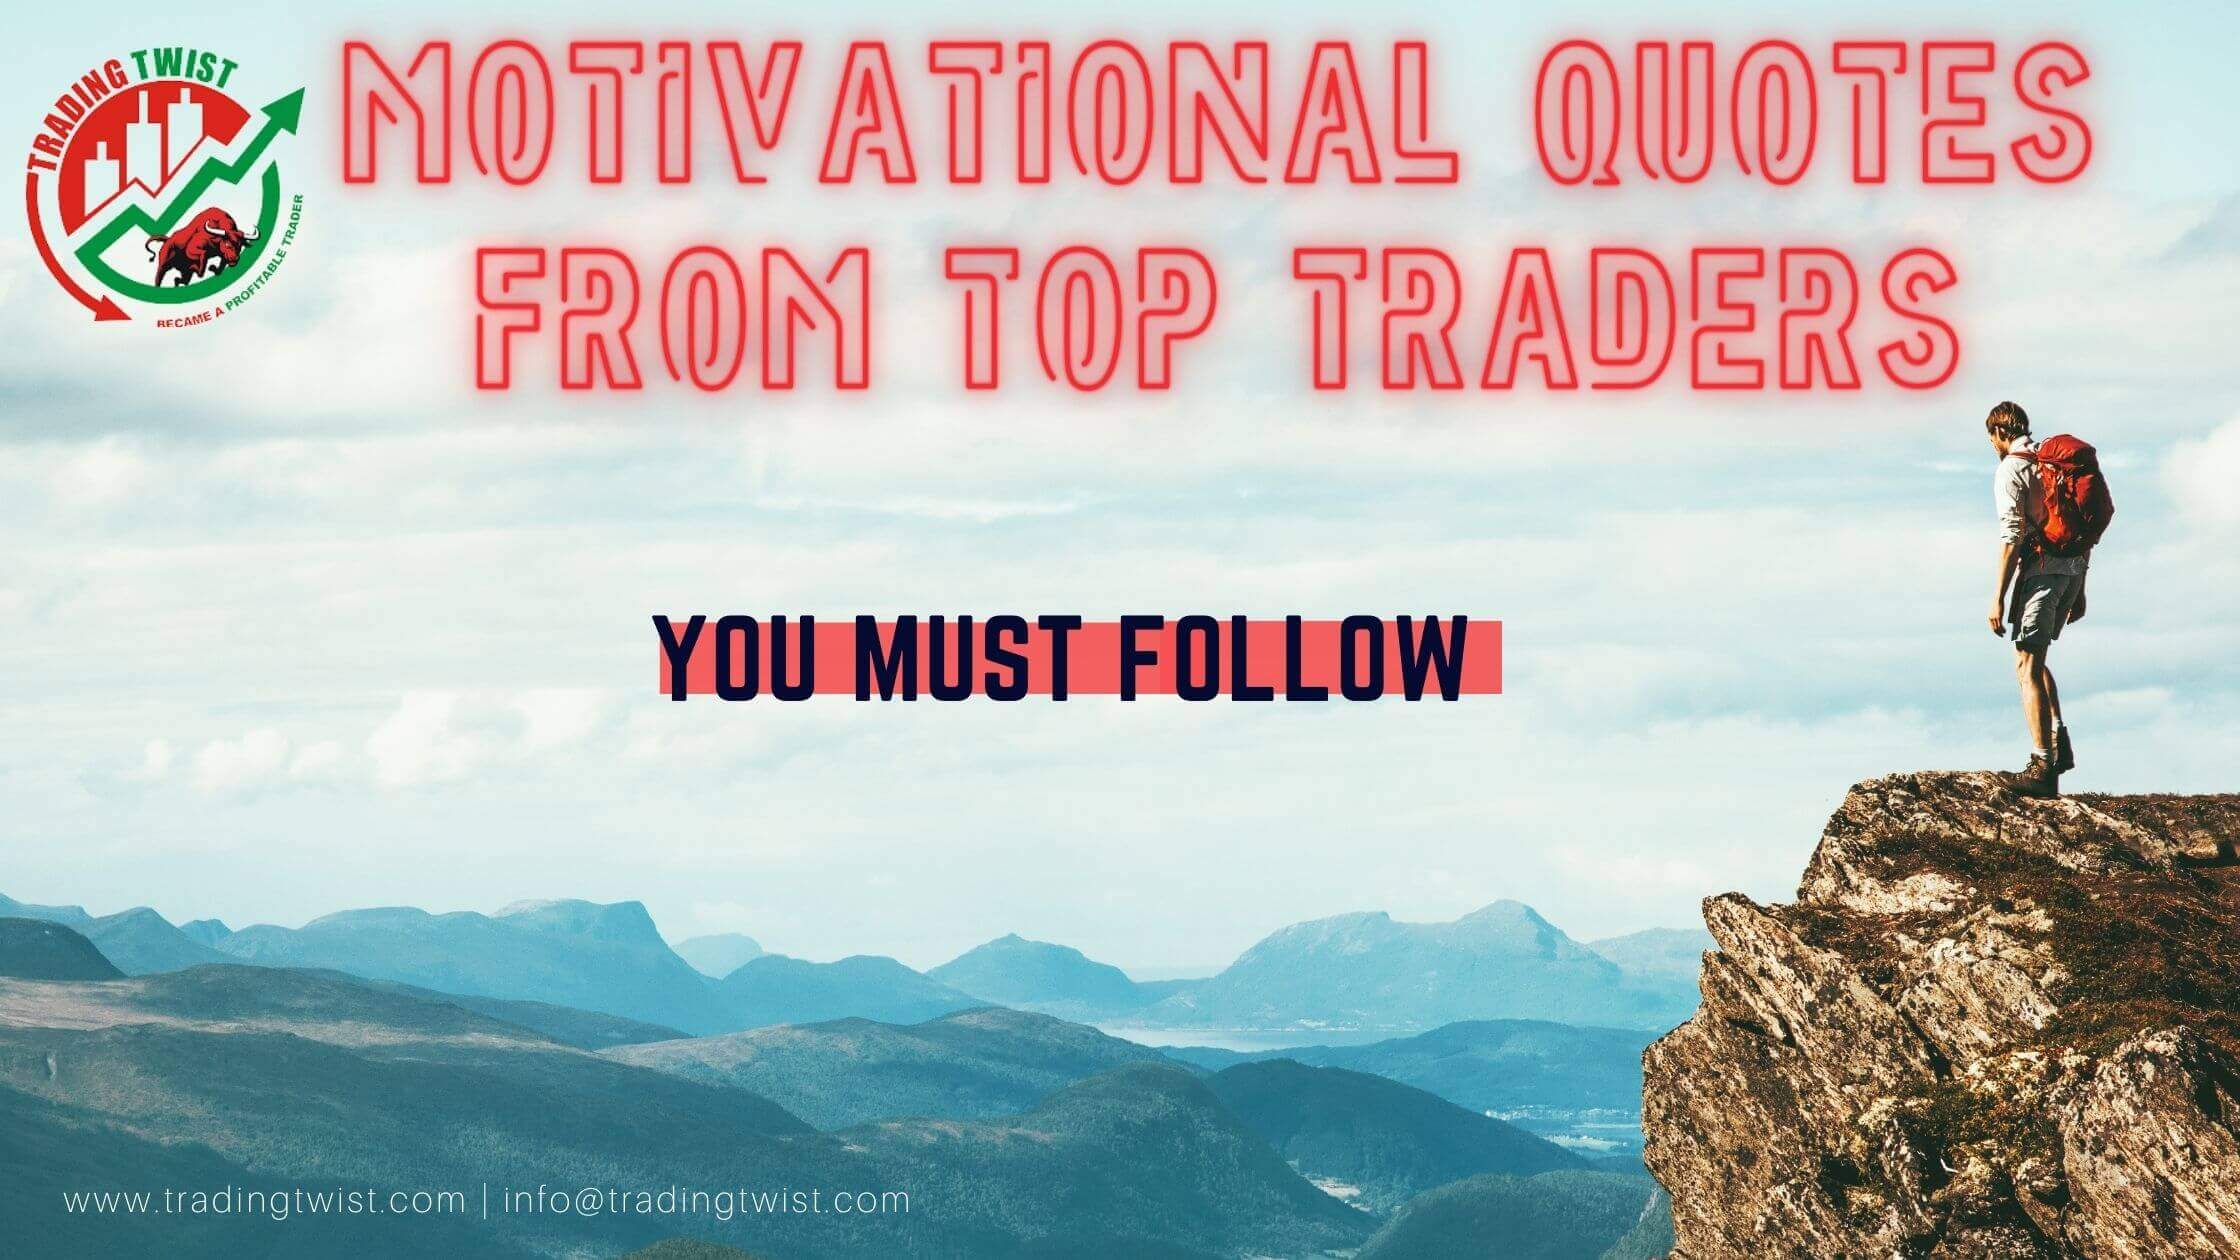 Motivational Quotes from Top Traders